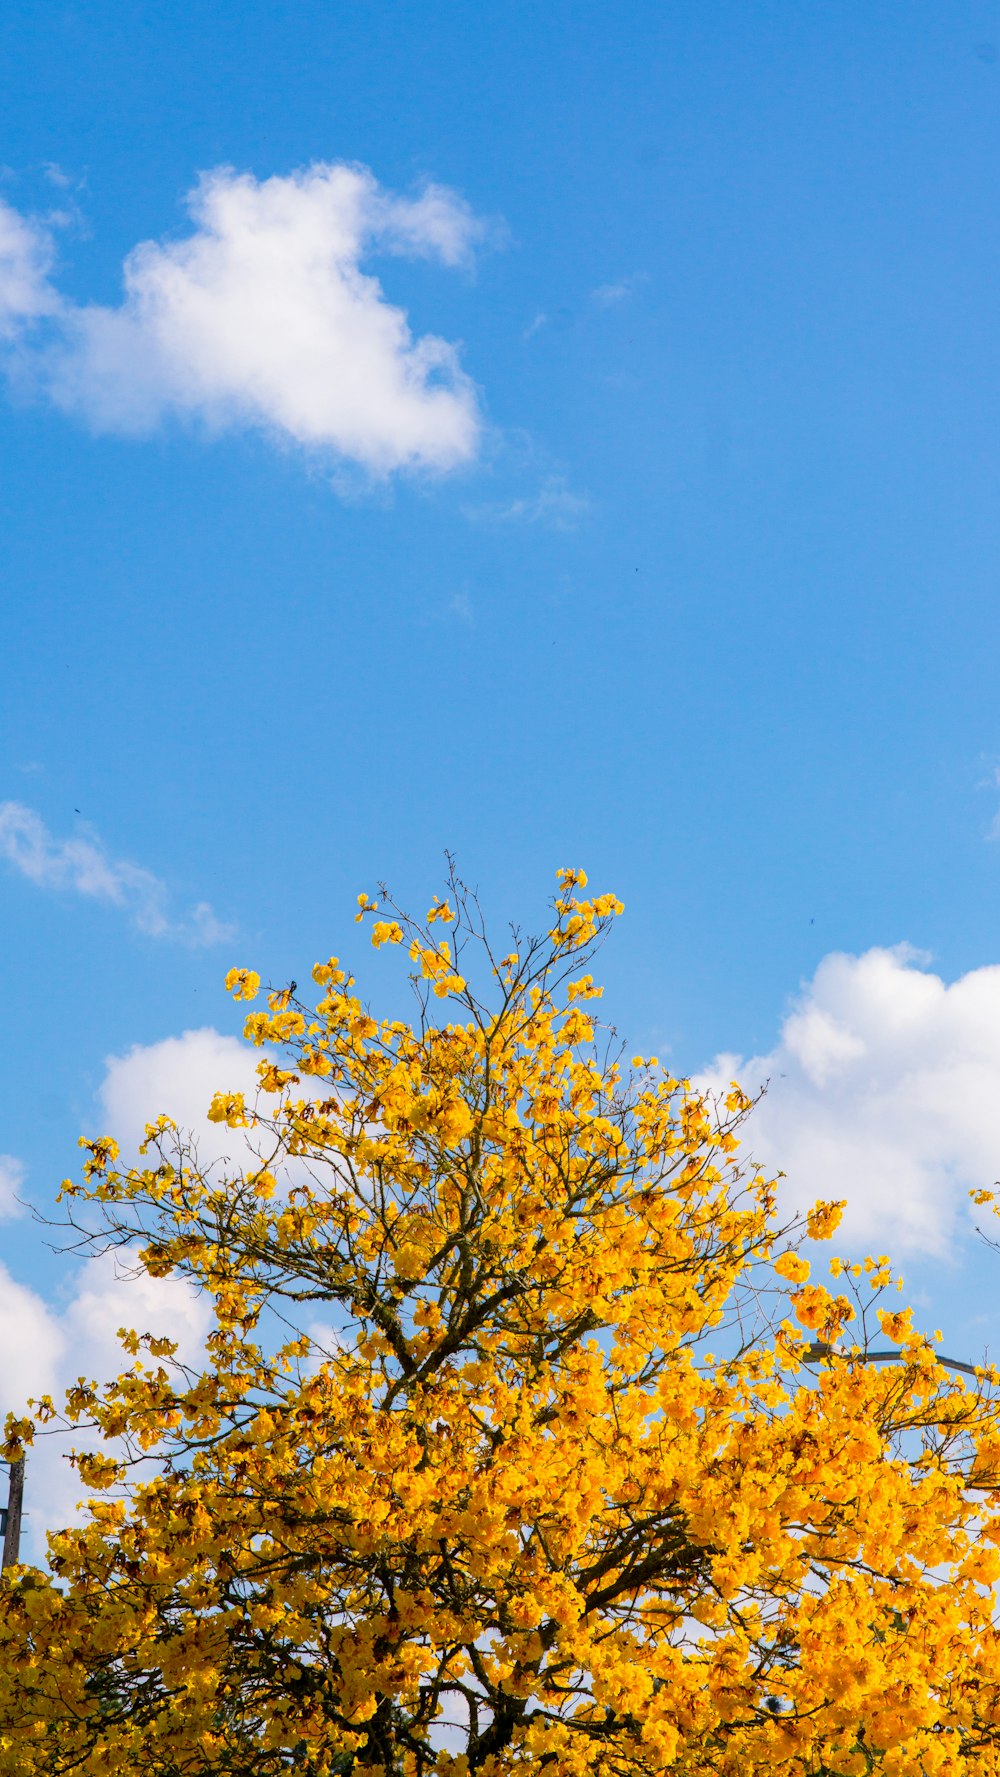 yellow leaf tree under blue sky during daytime